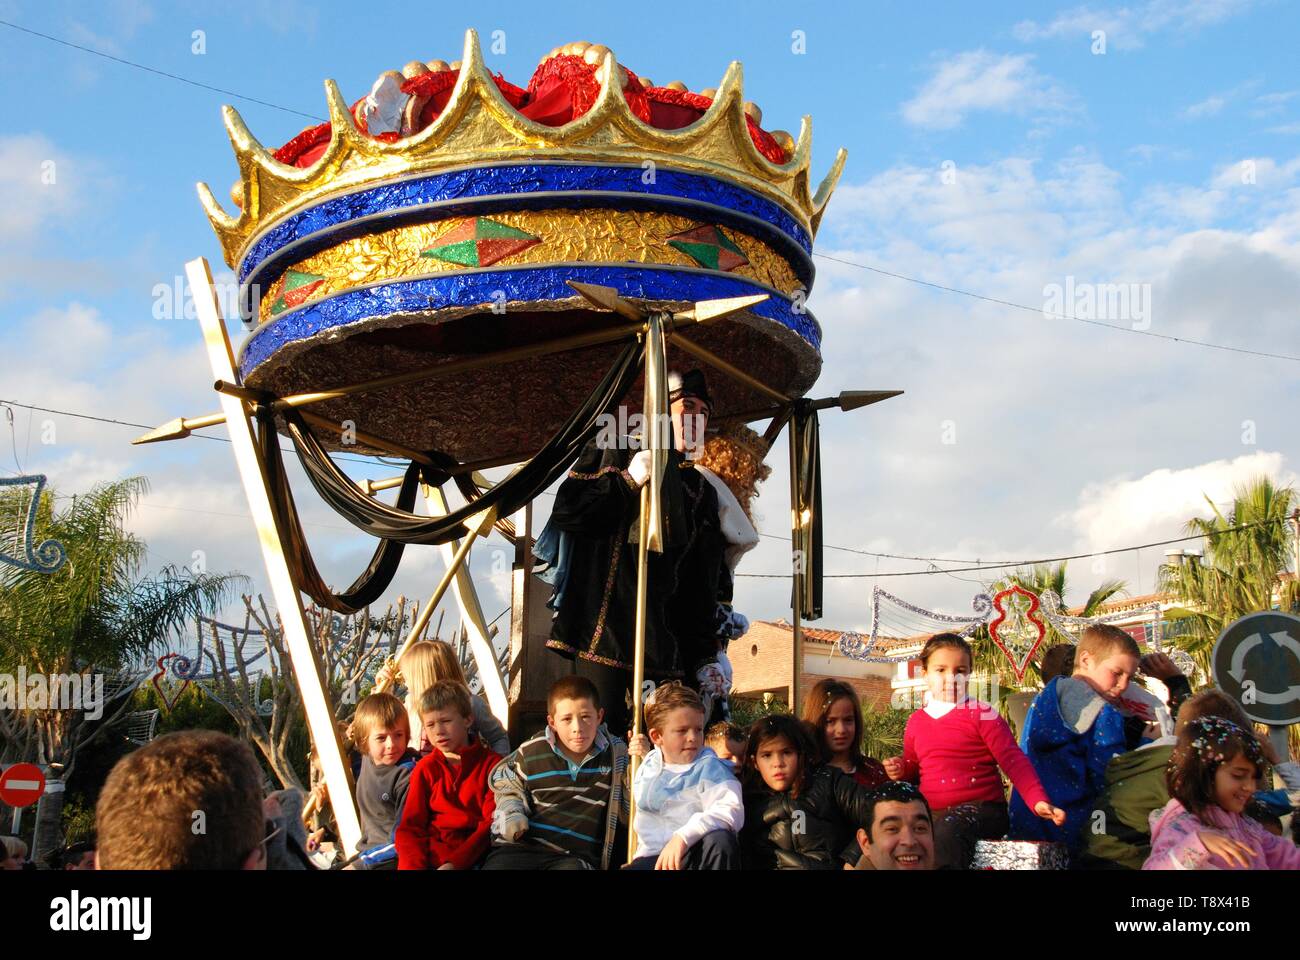 Three Kings Parade with Gaspar standing in his carriage and children sitting on the float, La Cala de Mijas, Spain. Stock Photo